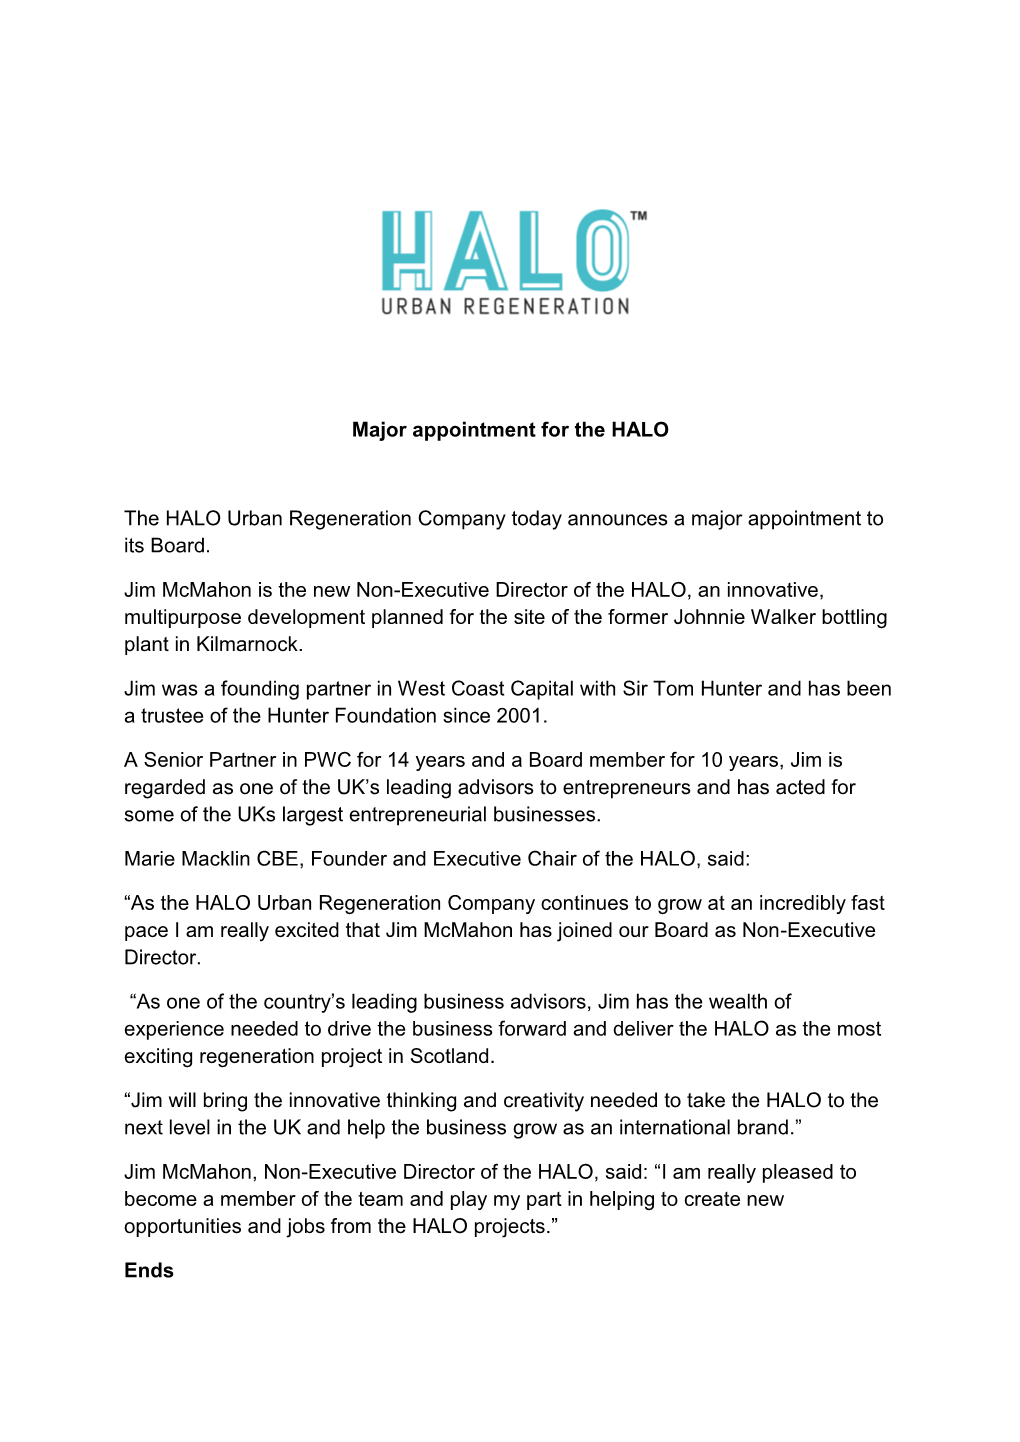 Major Appointment for the HALO the HALO Urban Regeneration